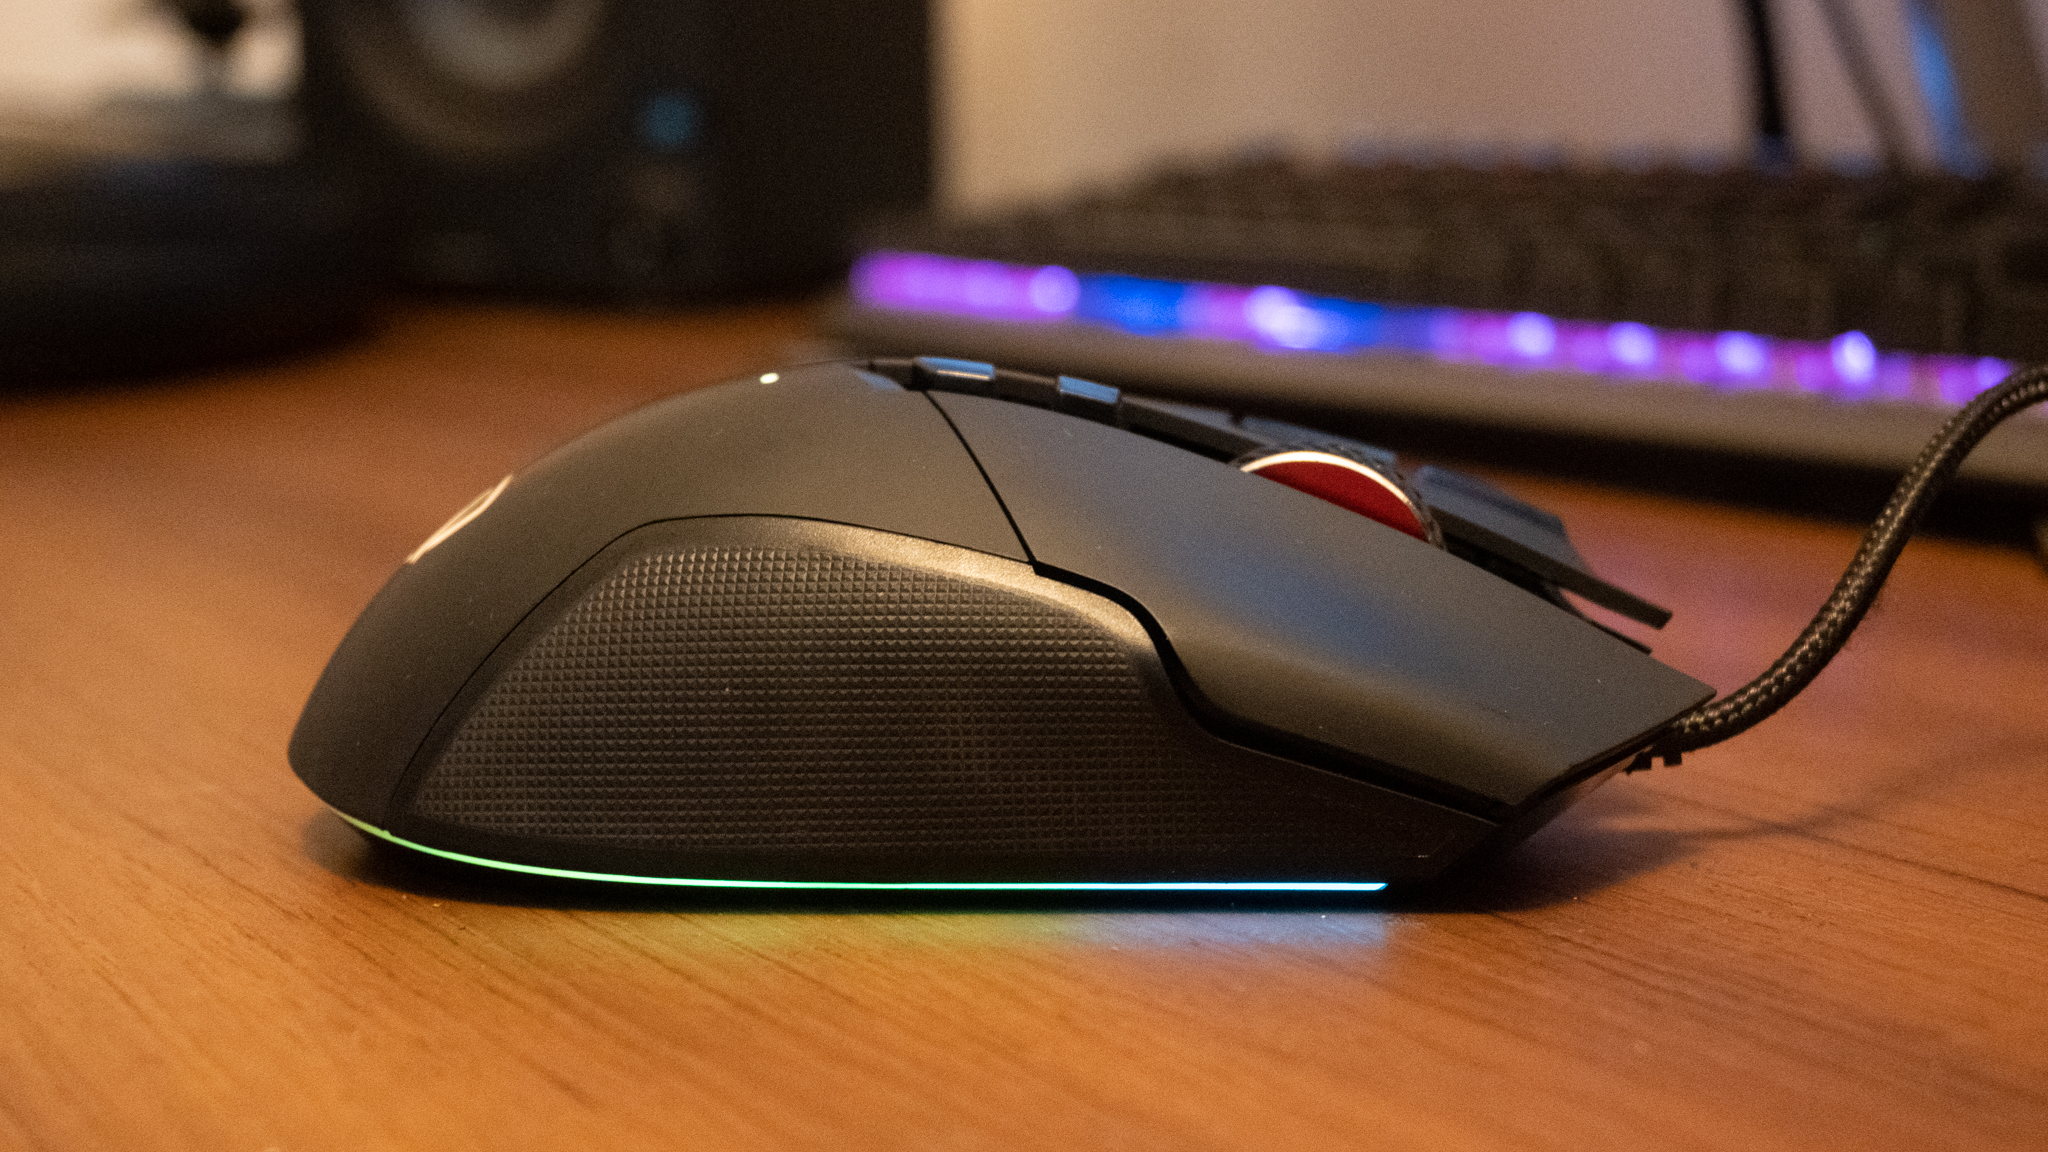 A black AOC AGM600 gaming mouse sitting on a brown wooden desk